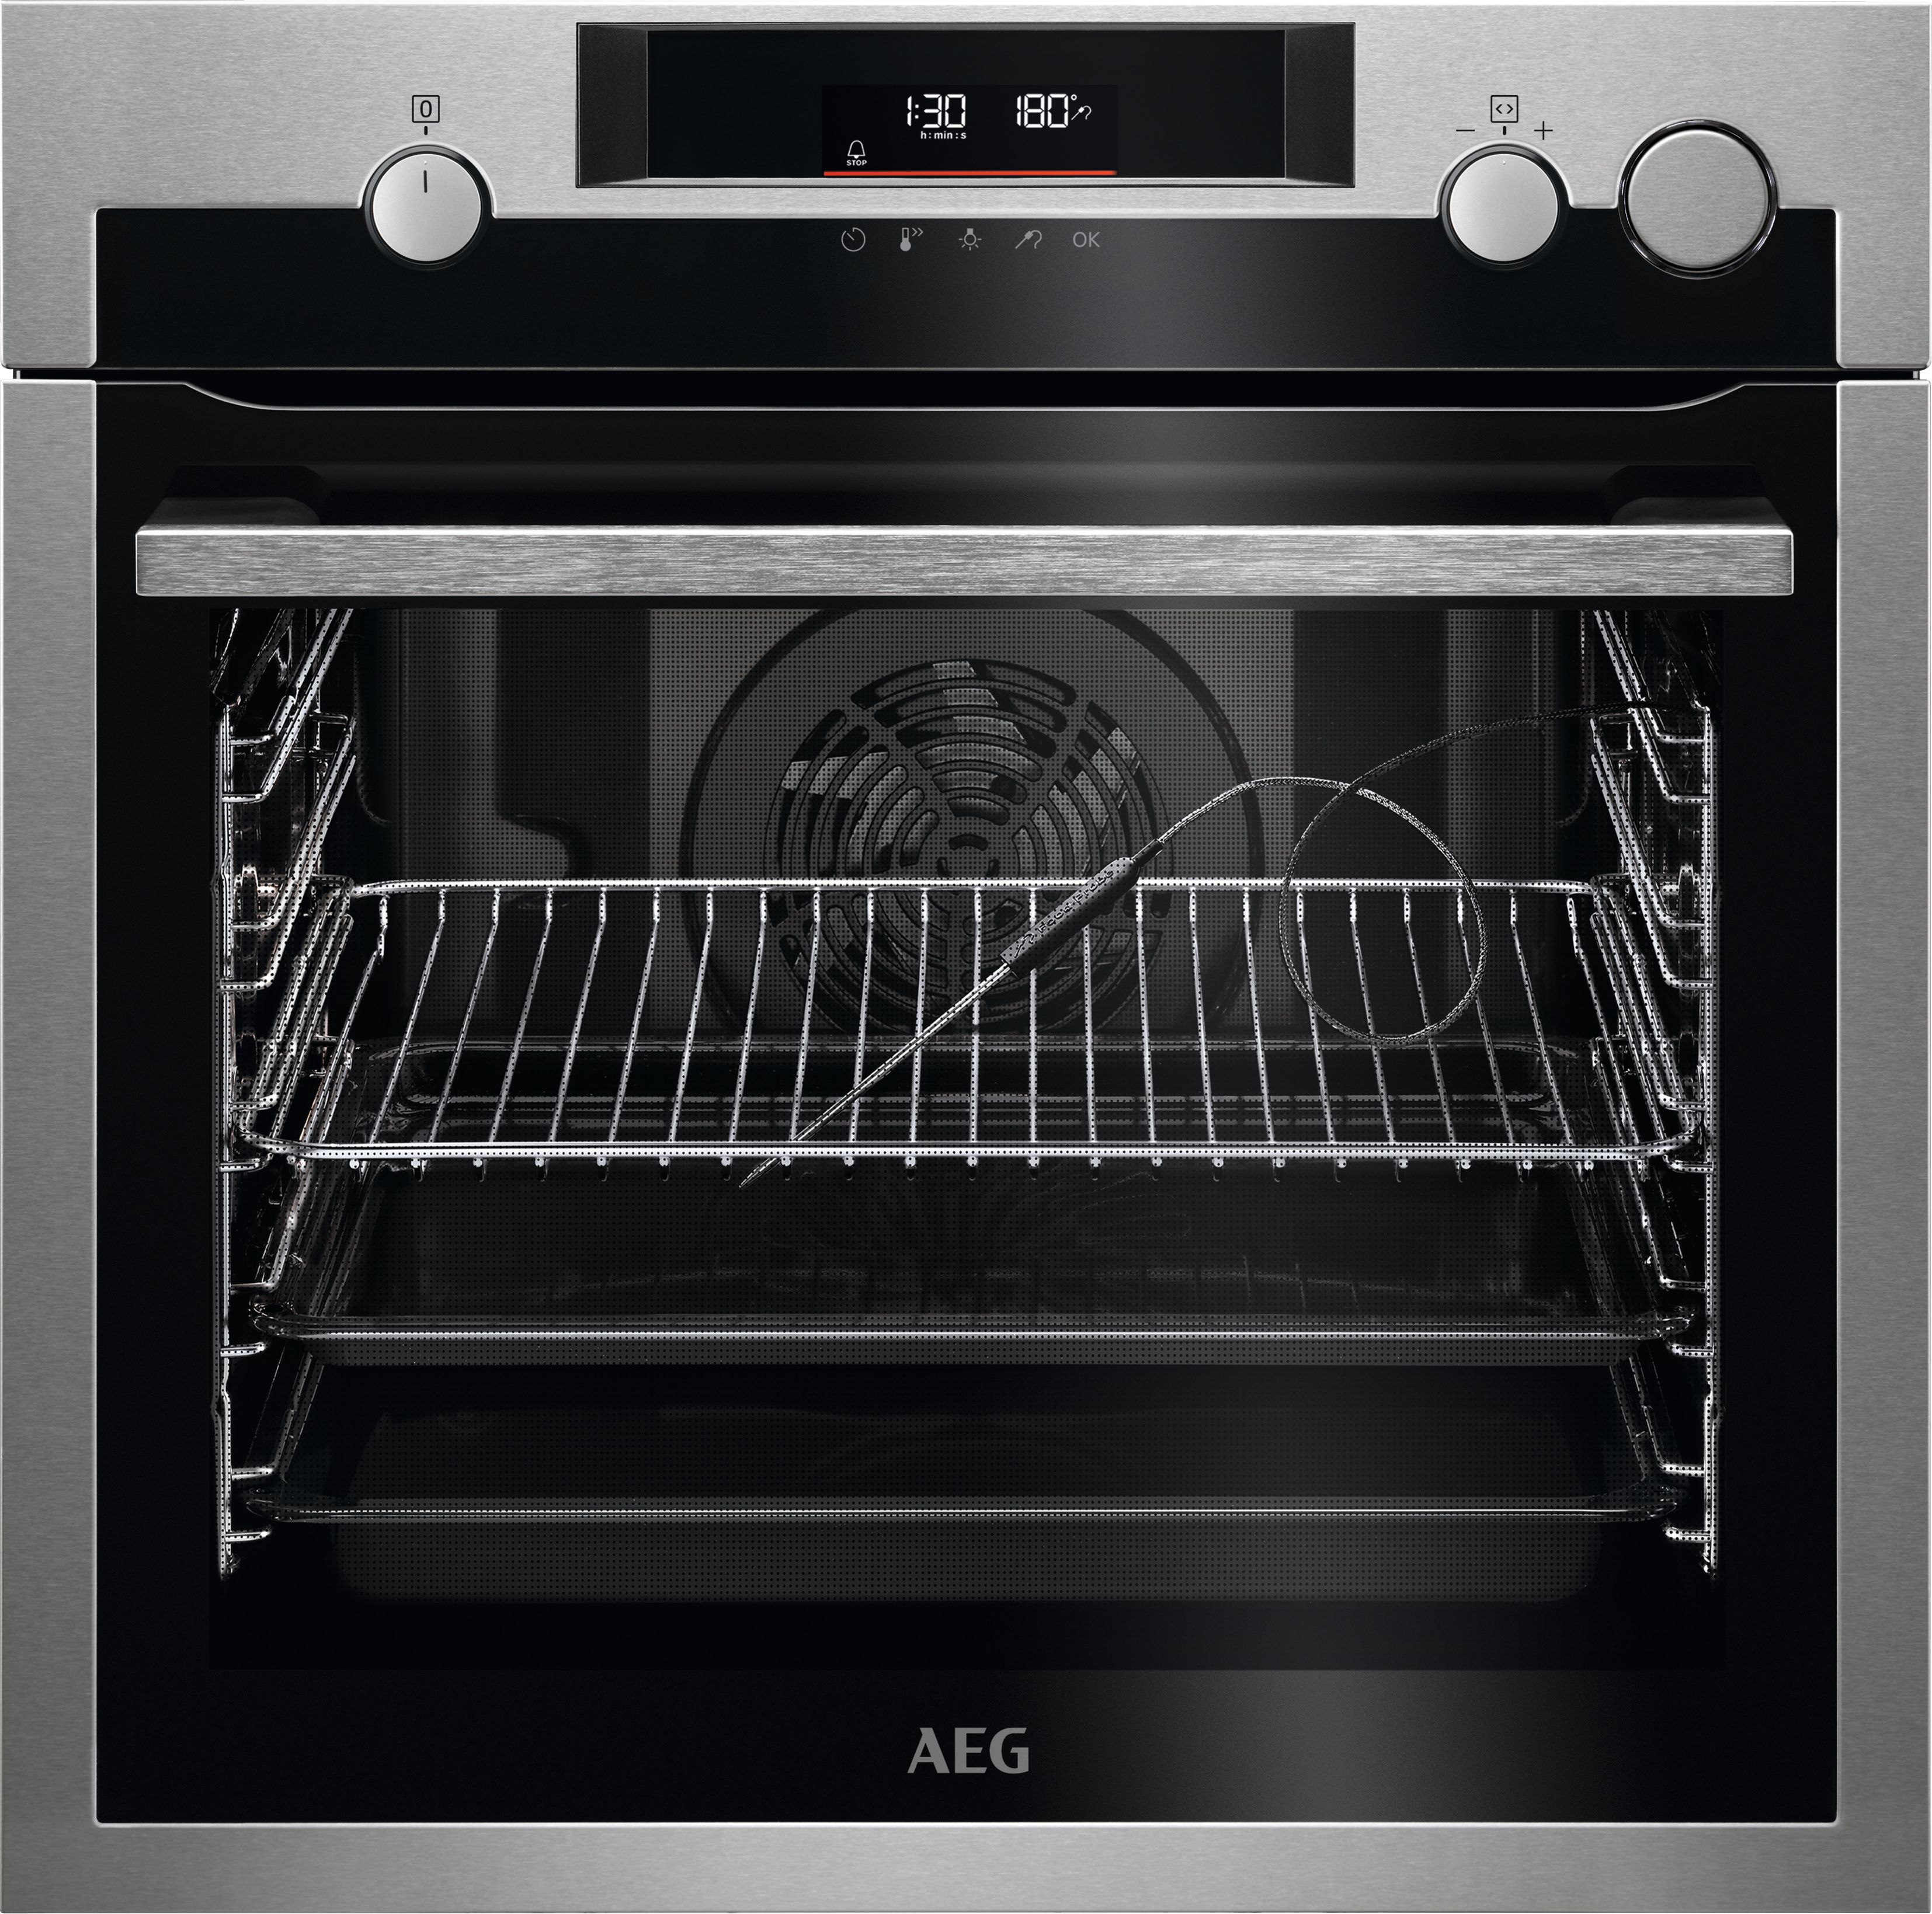 AEG 7000 SteamCrisp BSE577261M Built In Electric Single Oven and Pyrolytic Cleaning - Black / Stainless Steel - A+ Rated, Black